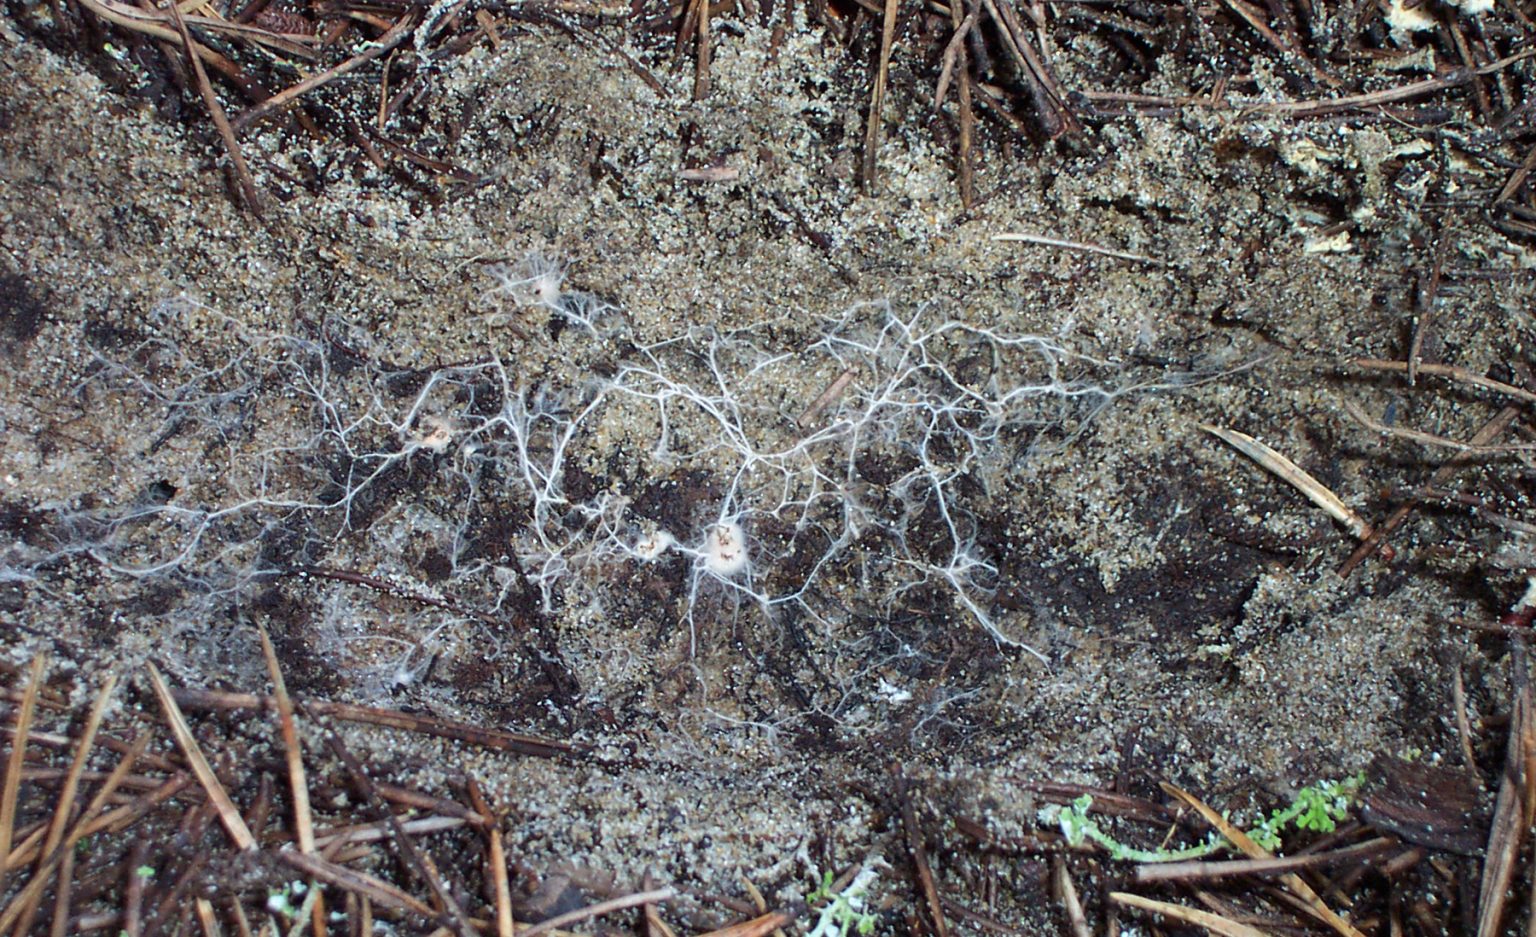 This image shows a mycorrhizal fungus, Ecto mycelium, in the soil, attached to roots of pine trees in the dunes of Oregon. Photo by Jason Hoeksema/UM Department of Biology